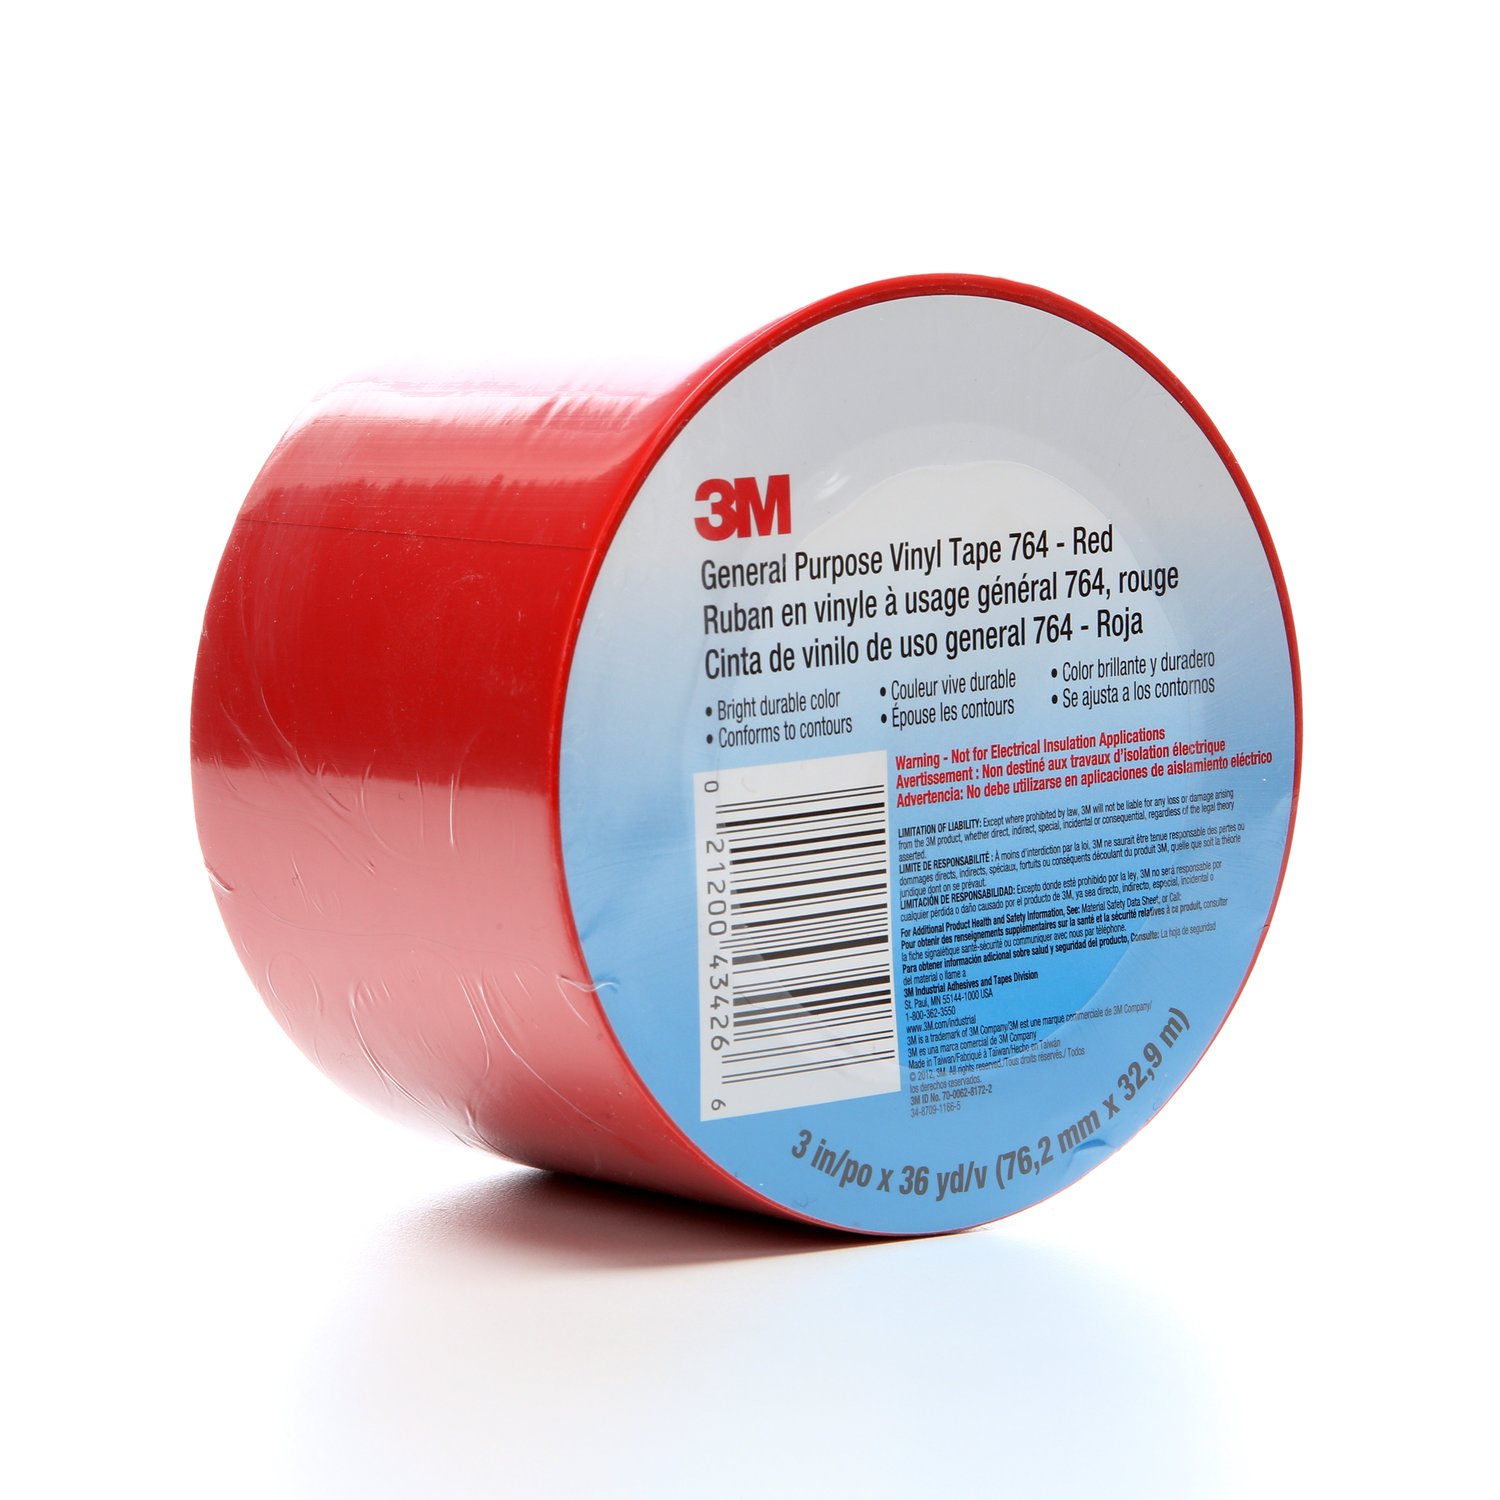 7000123885 - 3M General Purpose Vinyl Tape 764, Red, 3 in x 36 yd, 5 mil, 12 Roll/Case, Individually Wrapped Conveniently Packaged